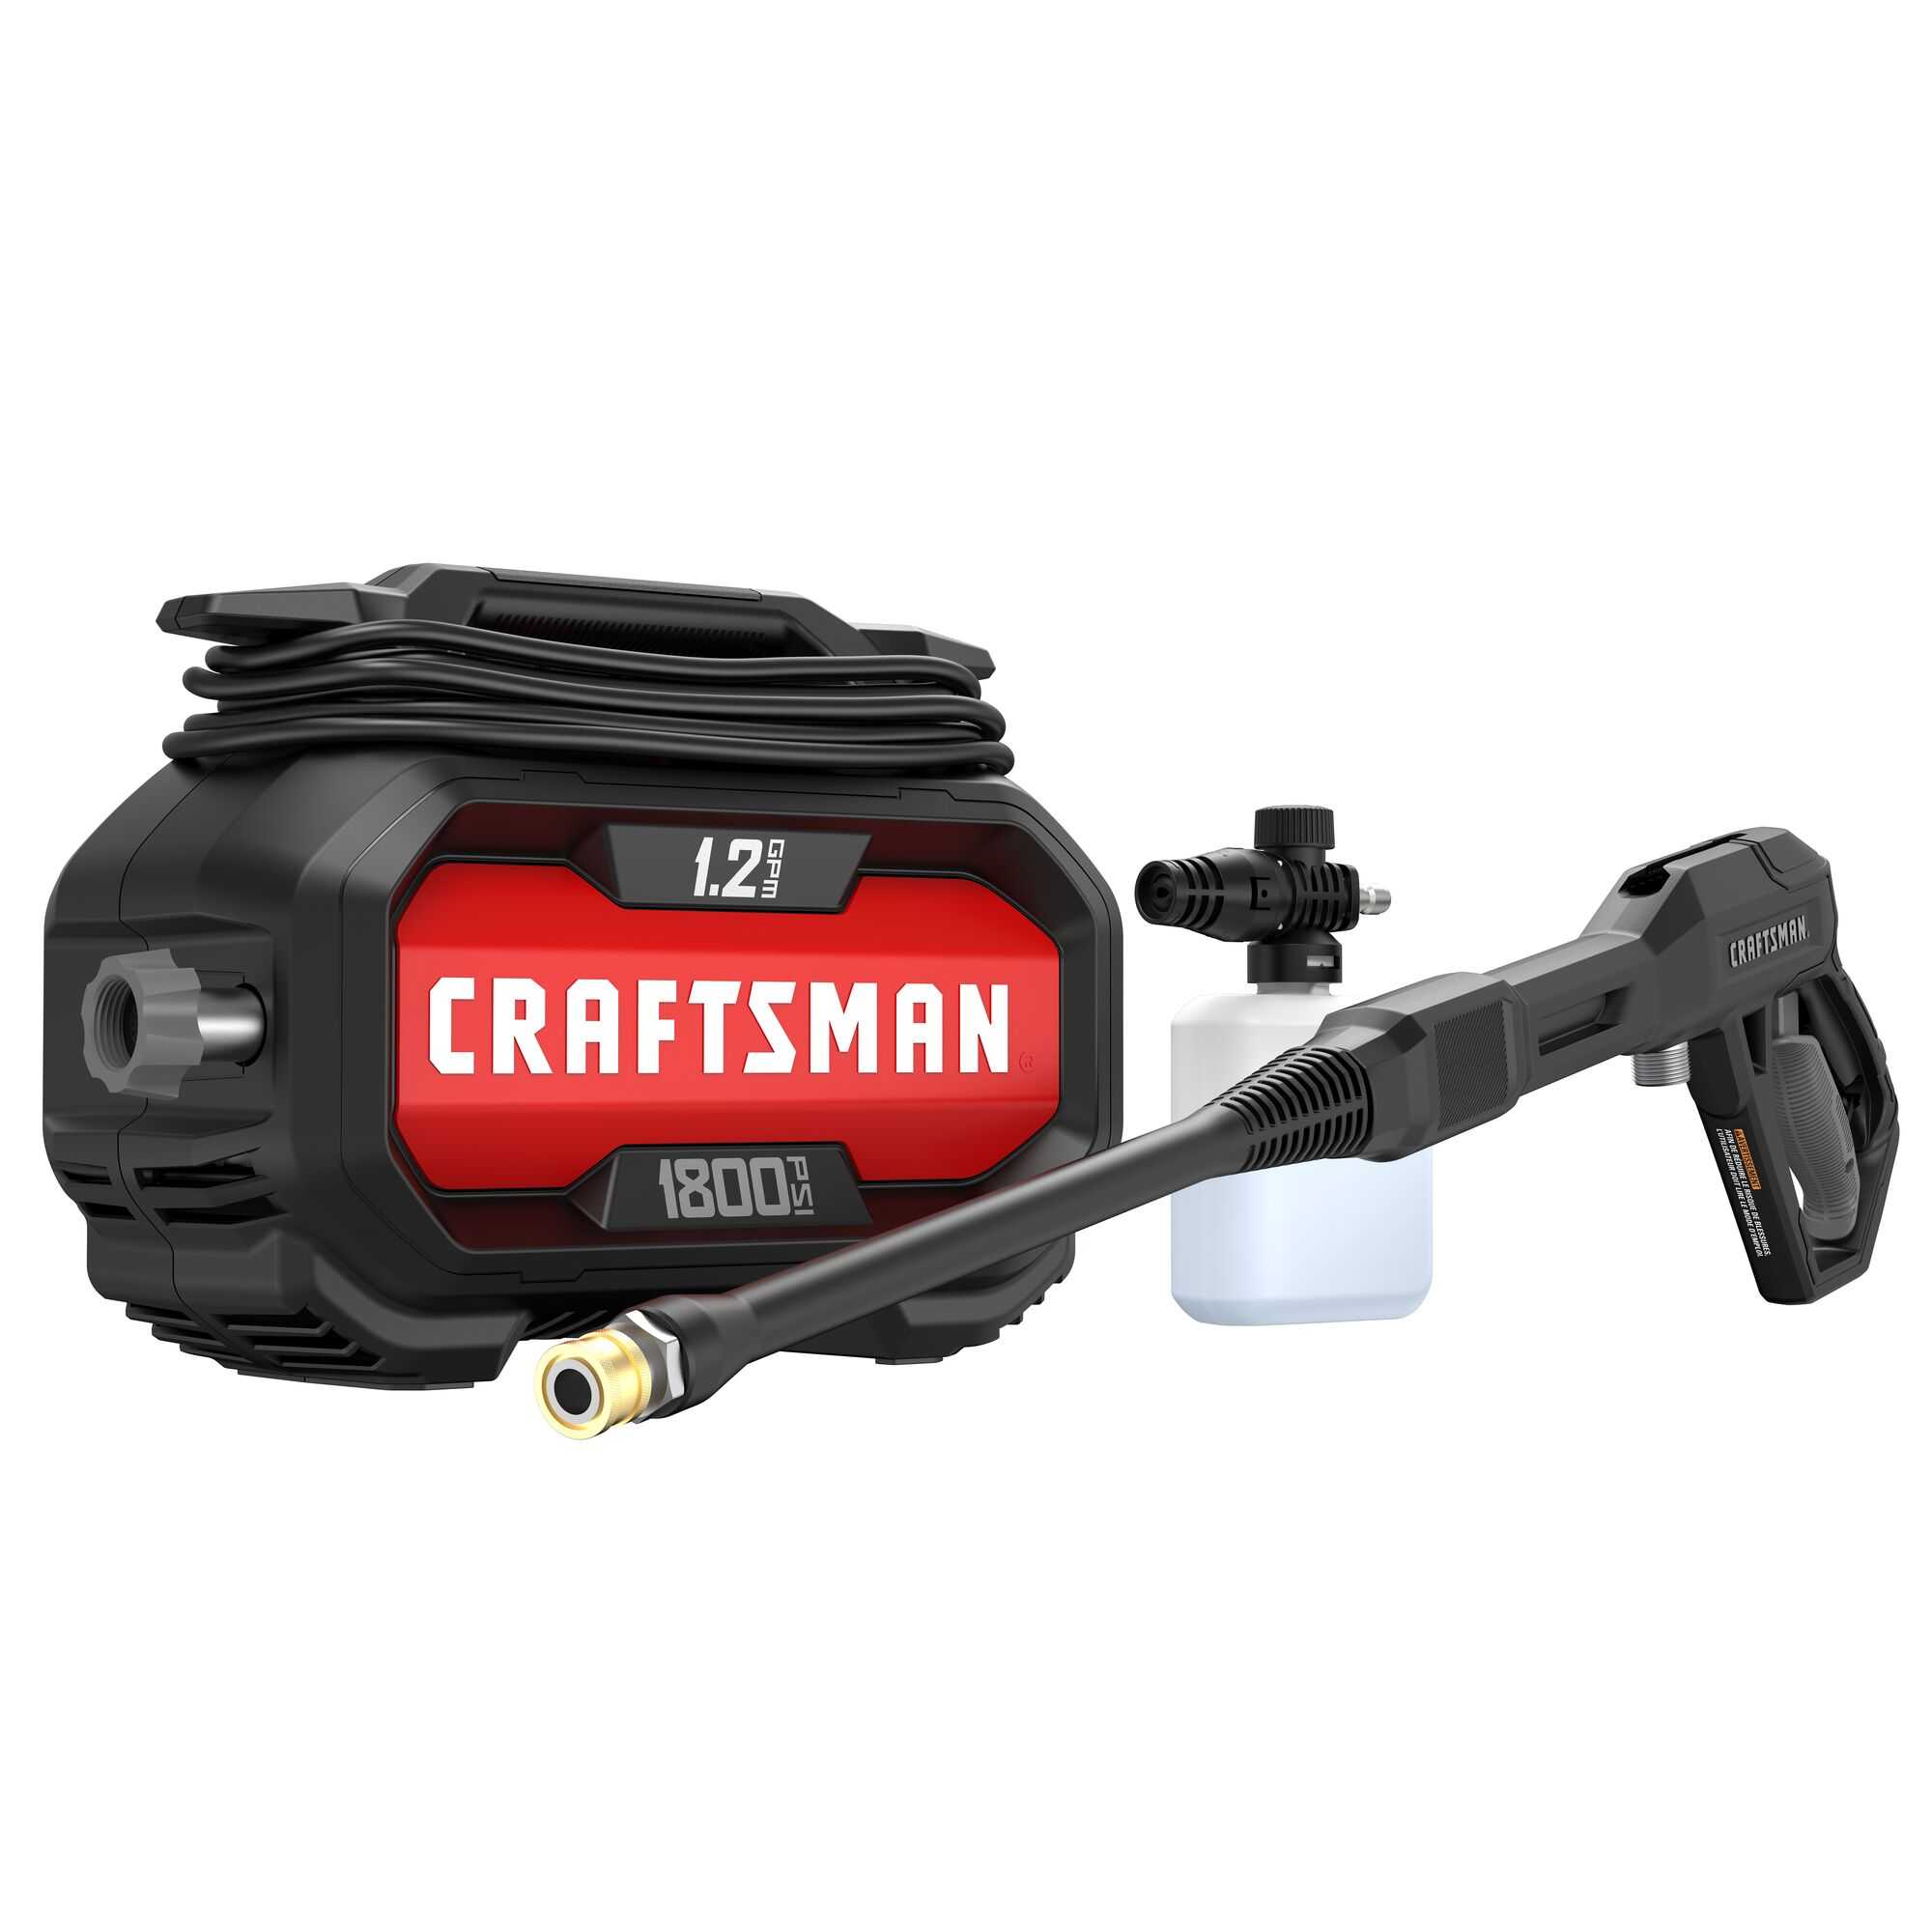 CRAFTSMAN 1800 PSI 1.2-Gallons Cold Water Electric Pressure Washer in Black | CMEPW1800